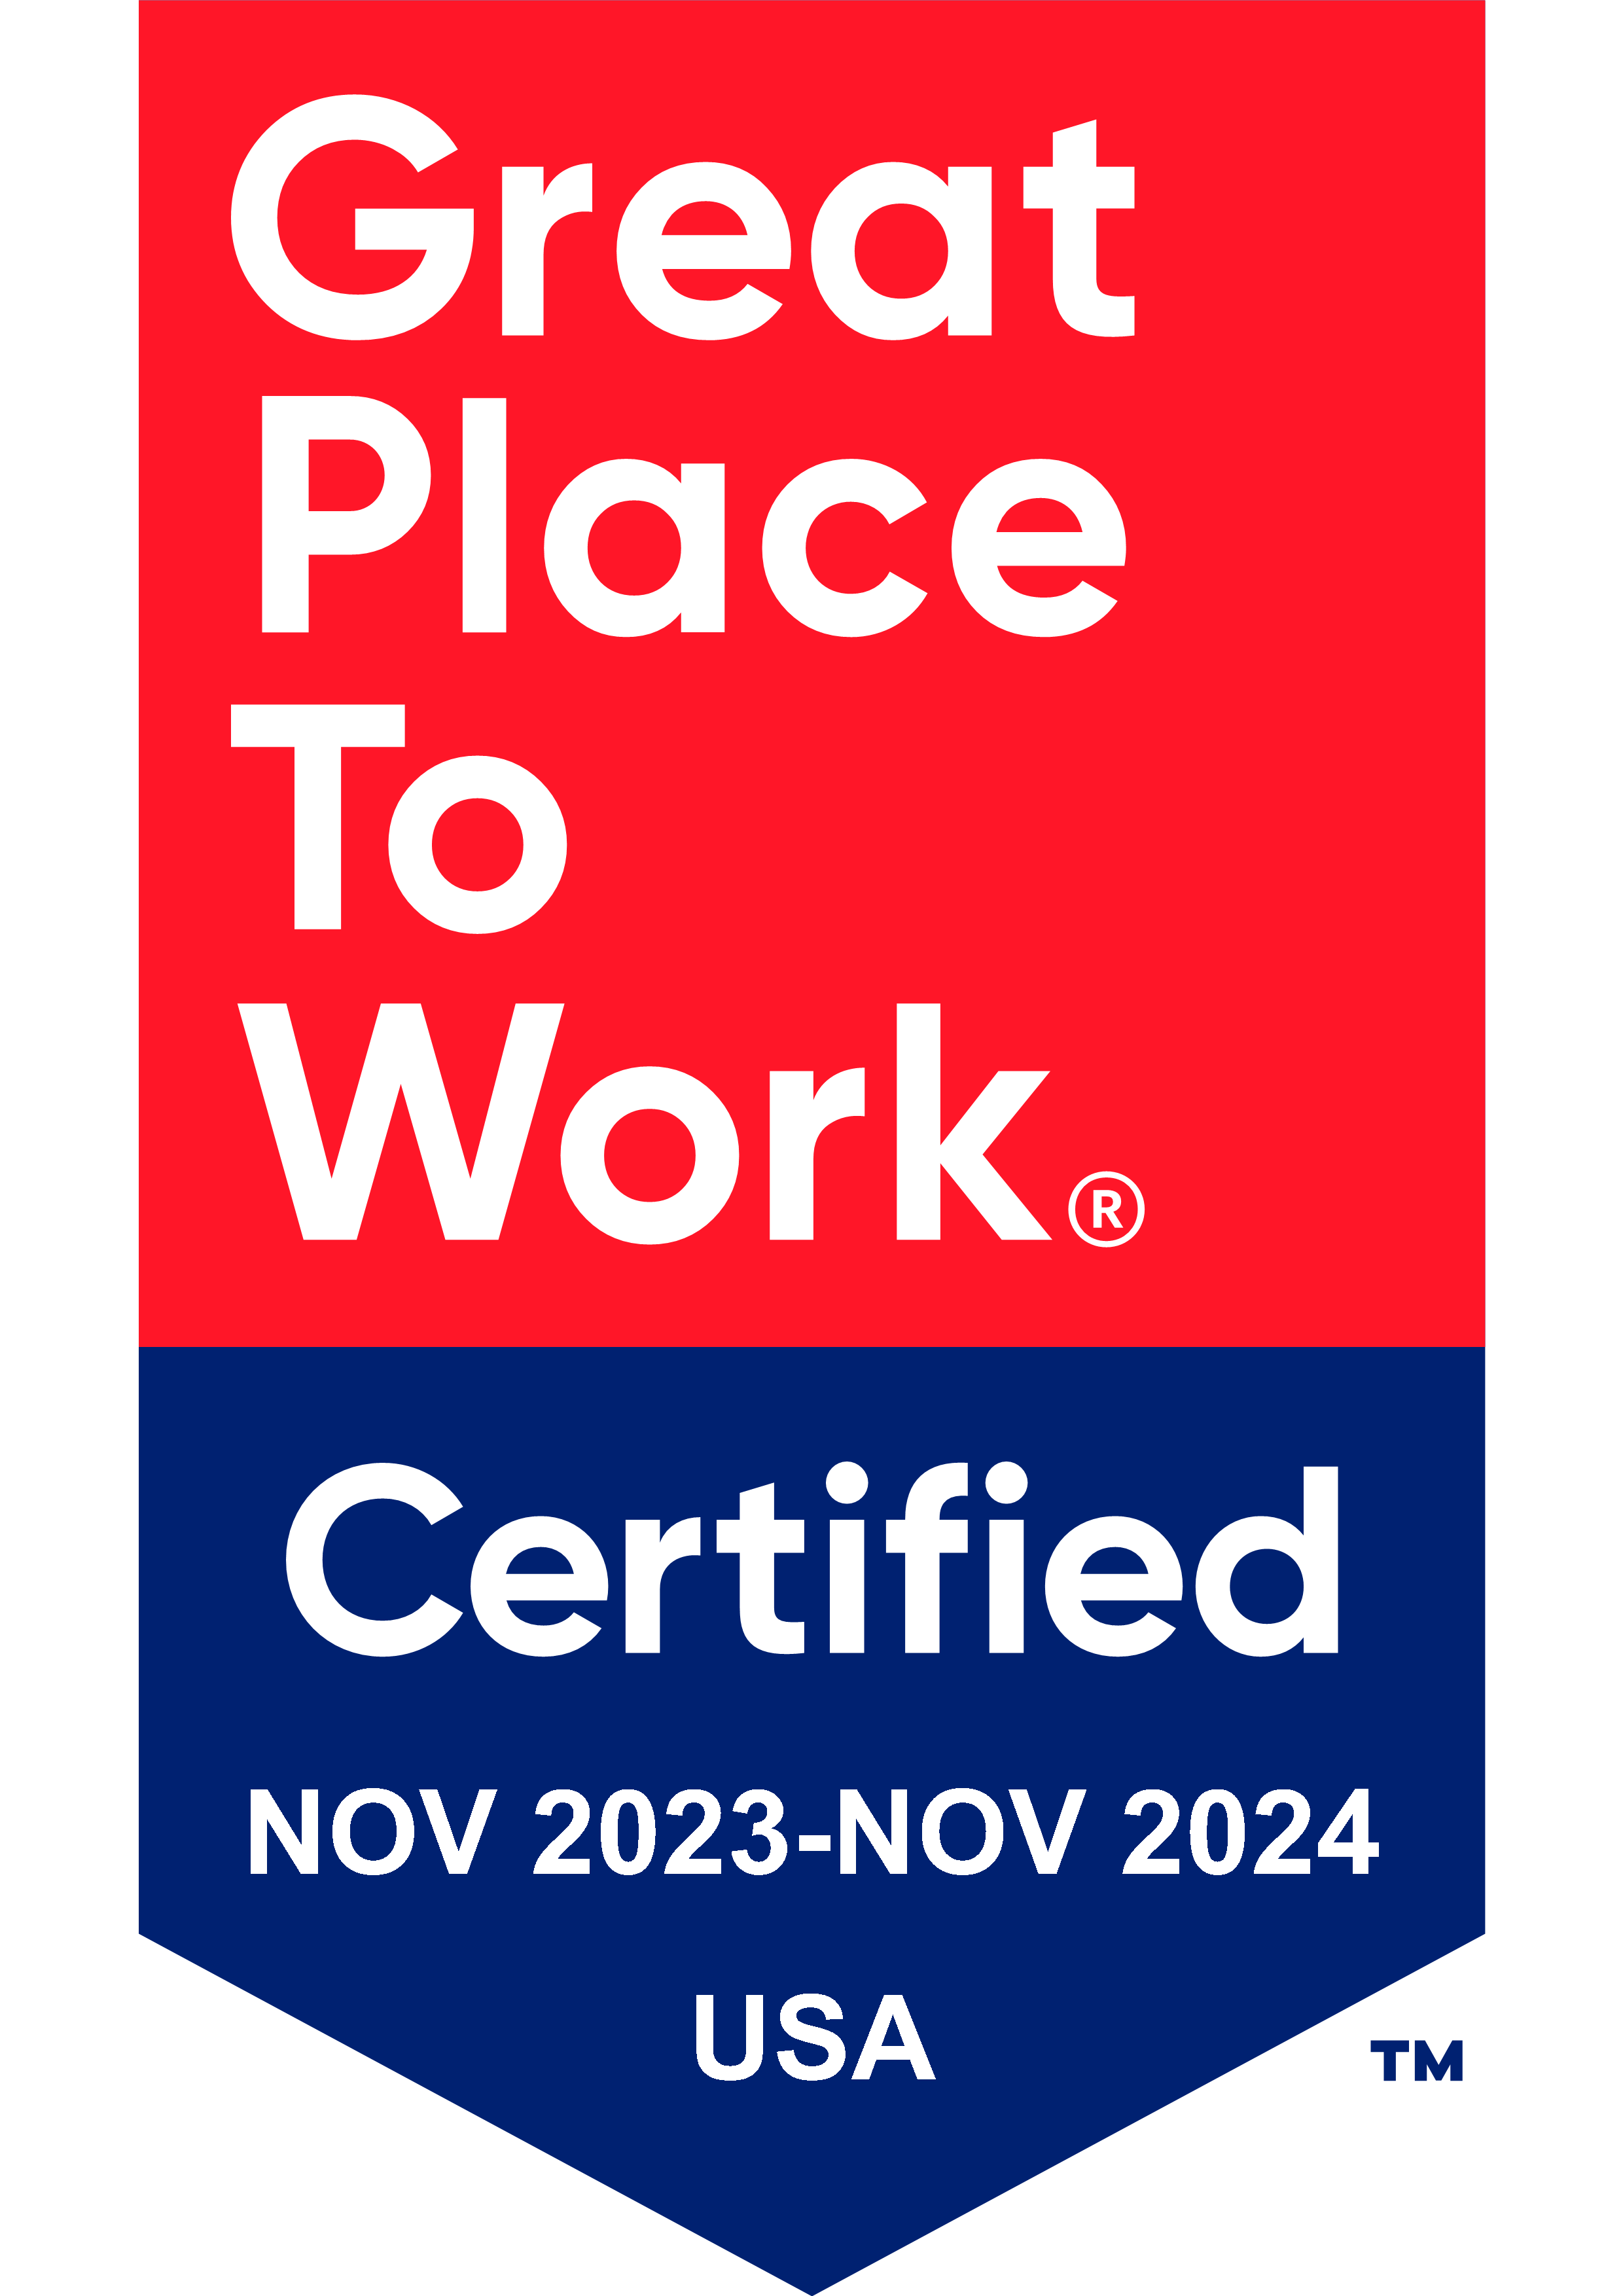 Fortune great place to work 2023 award